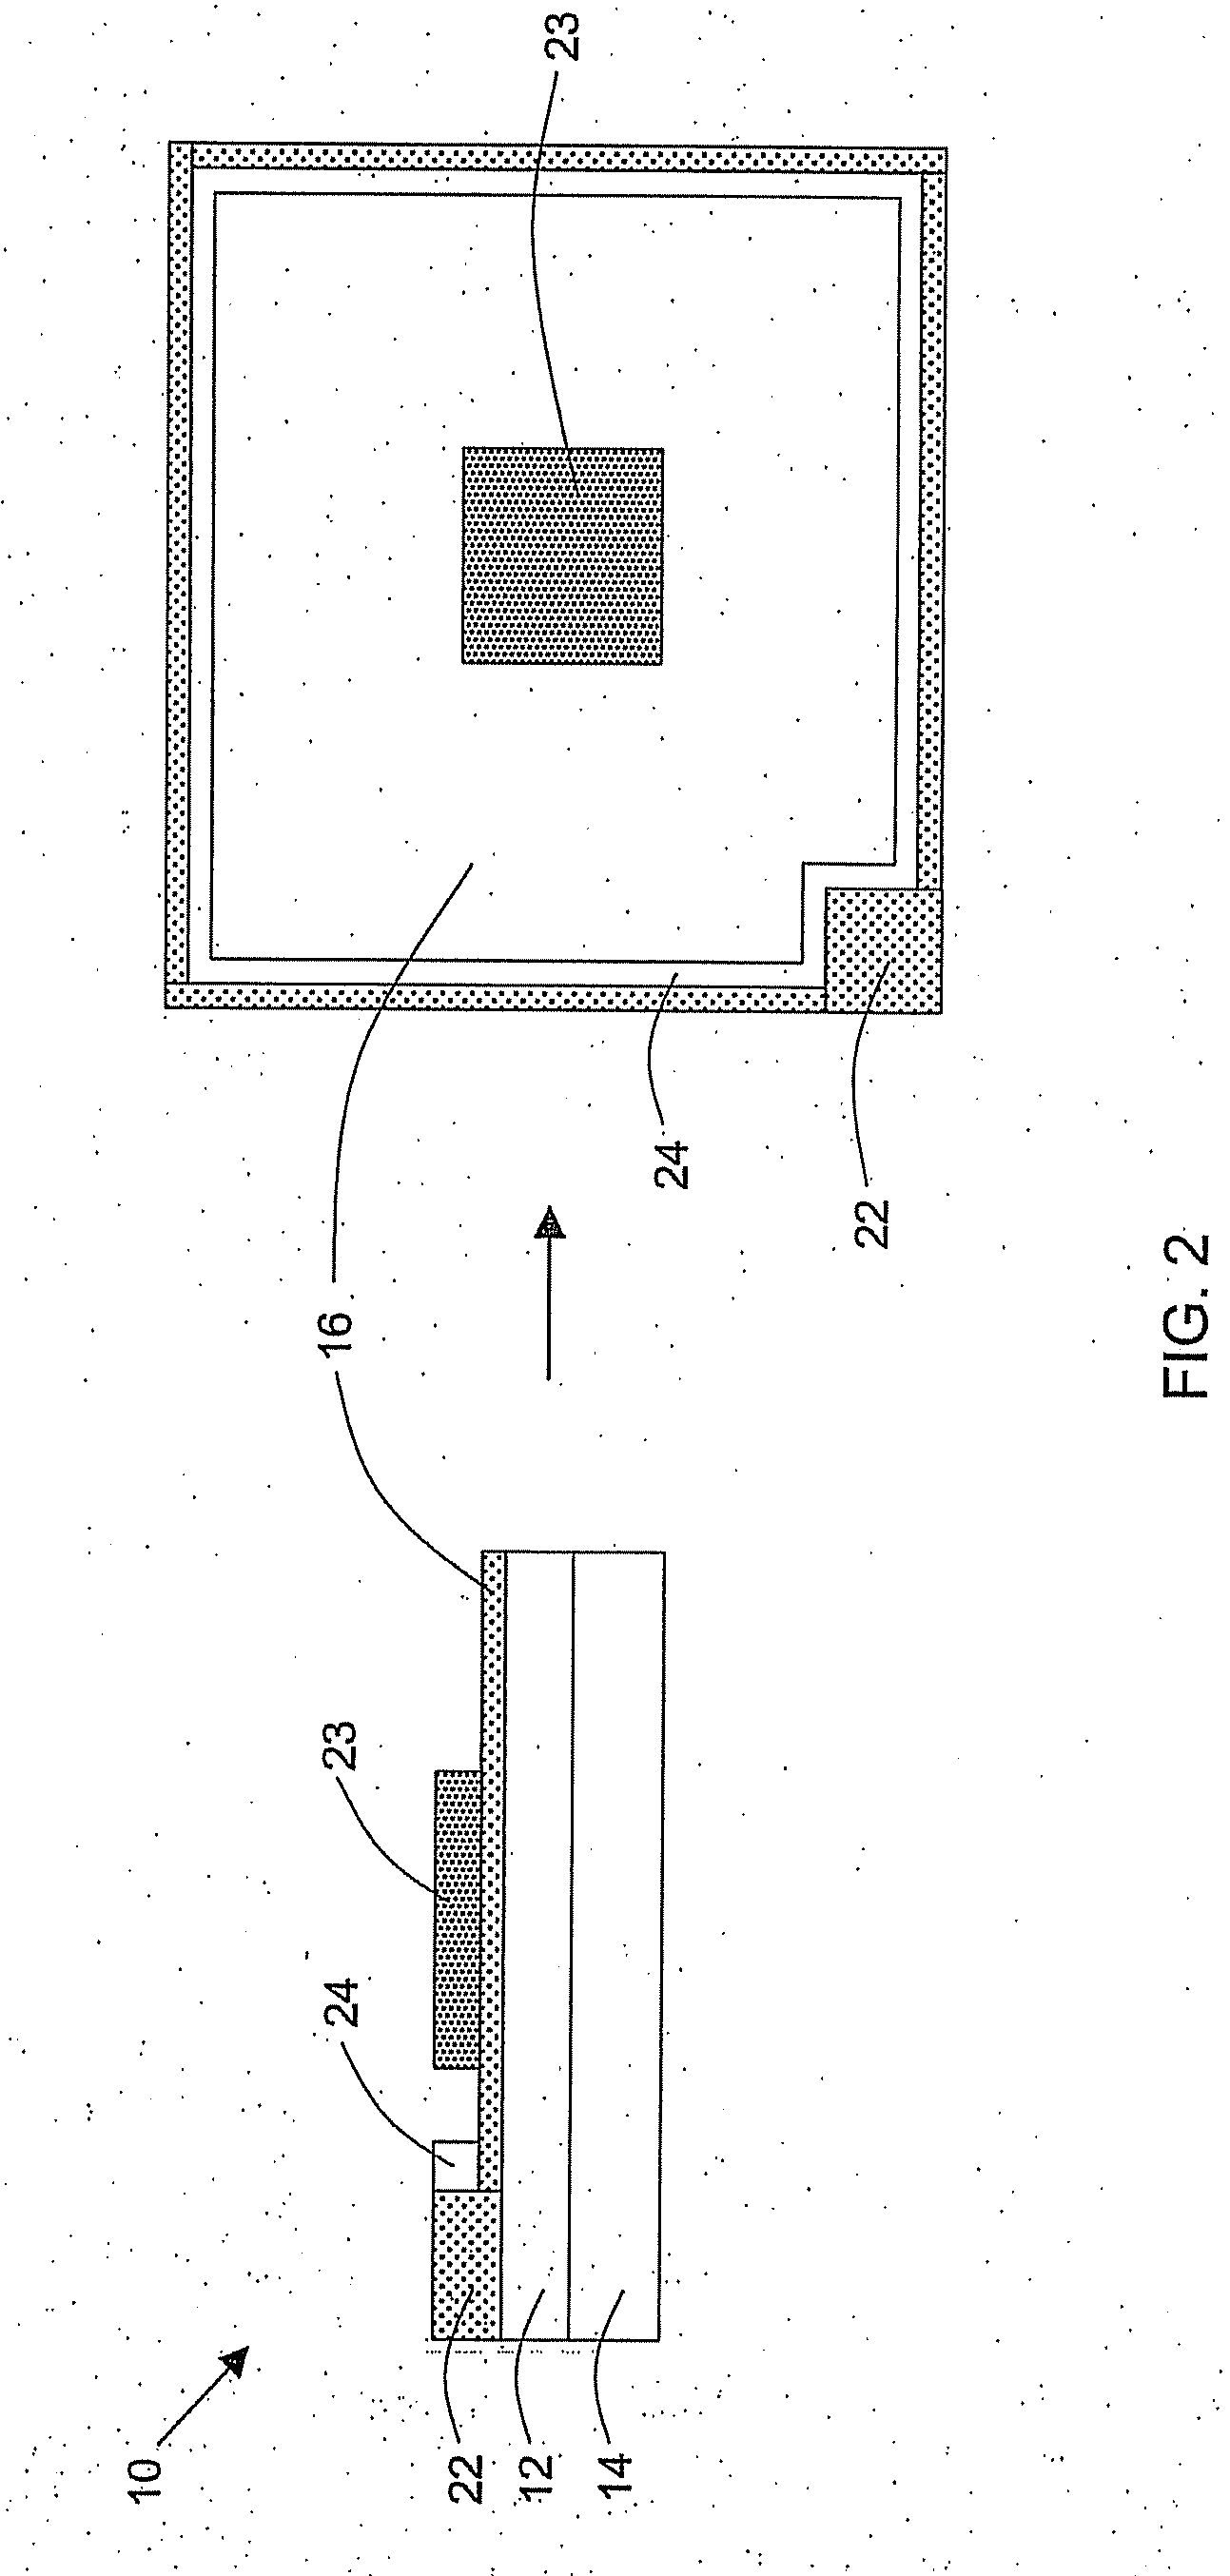 Sensor Device For Detection of Dissolved Hydrocarbon Gases in Oil Filled High-Voltage Electrical Equipment